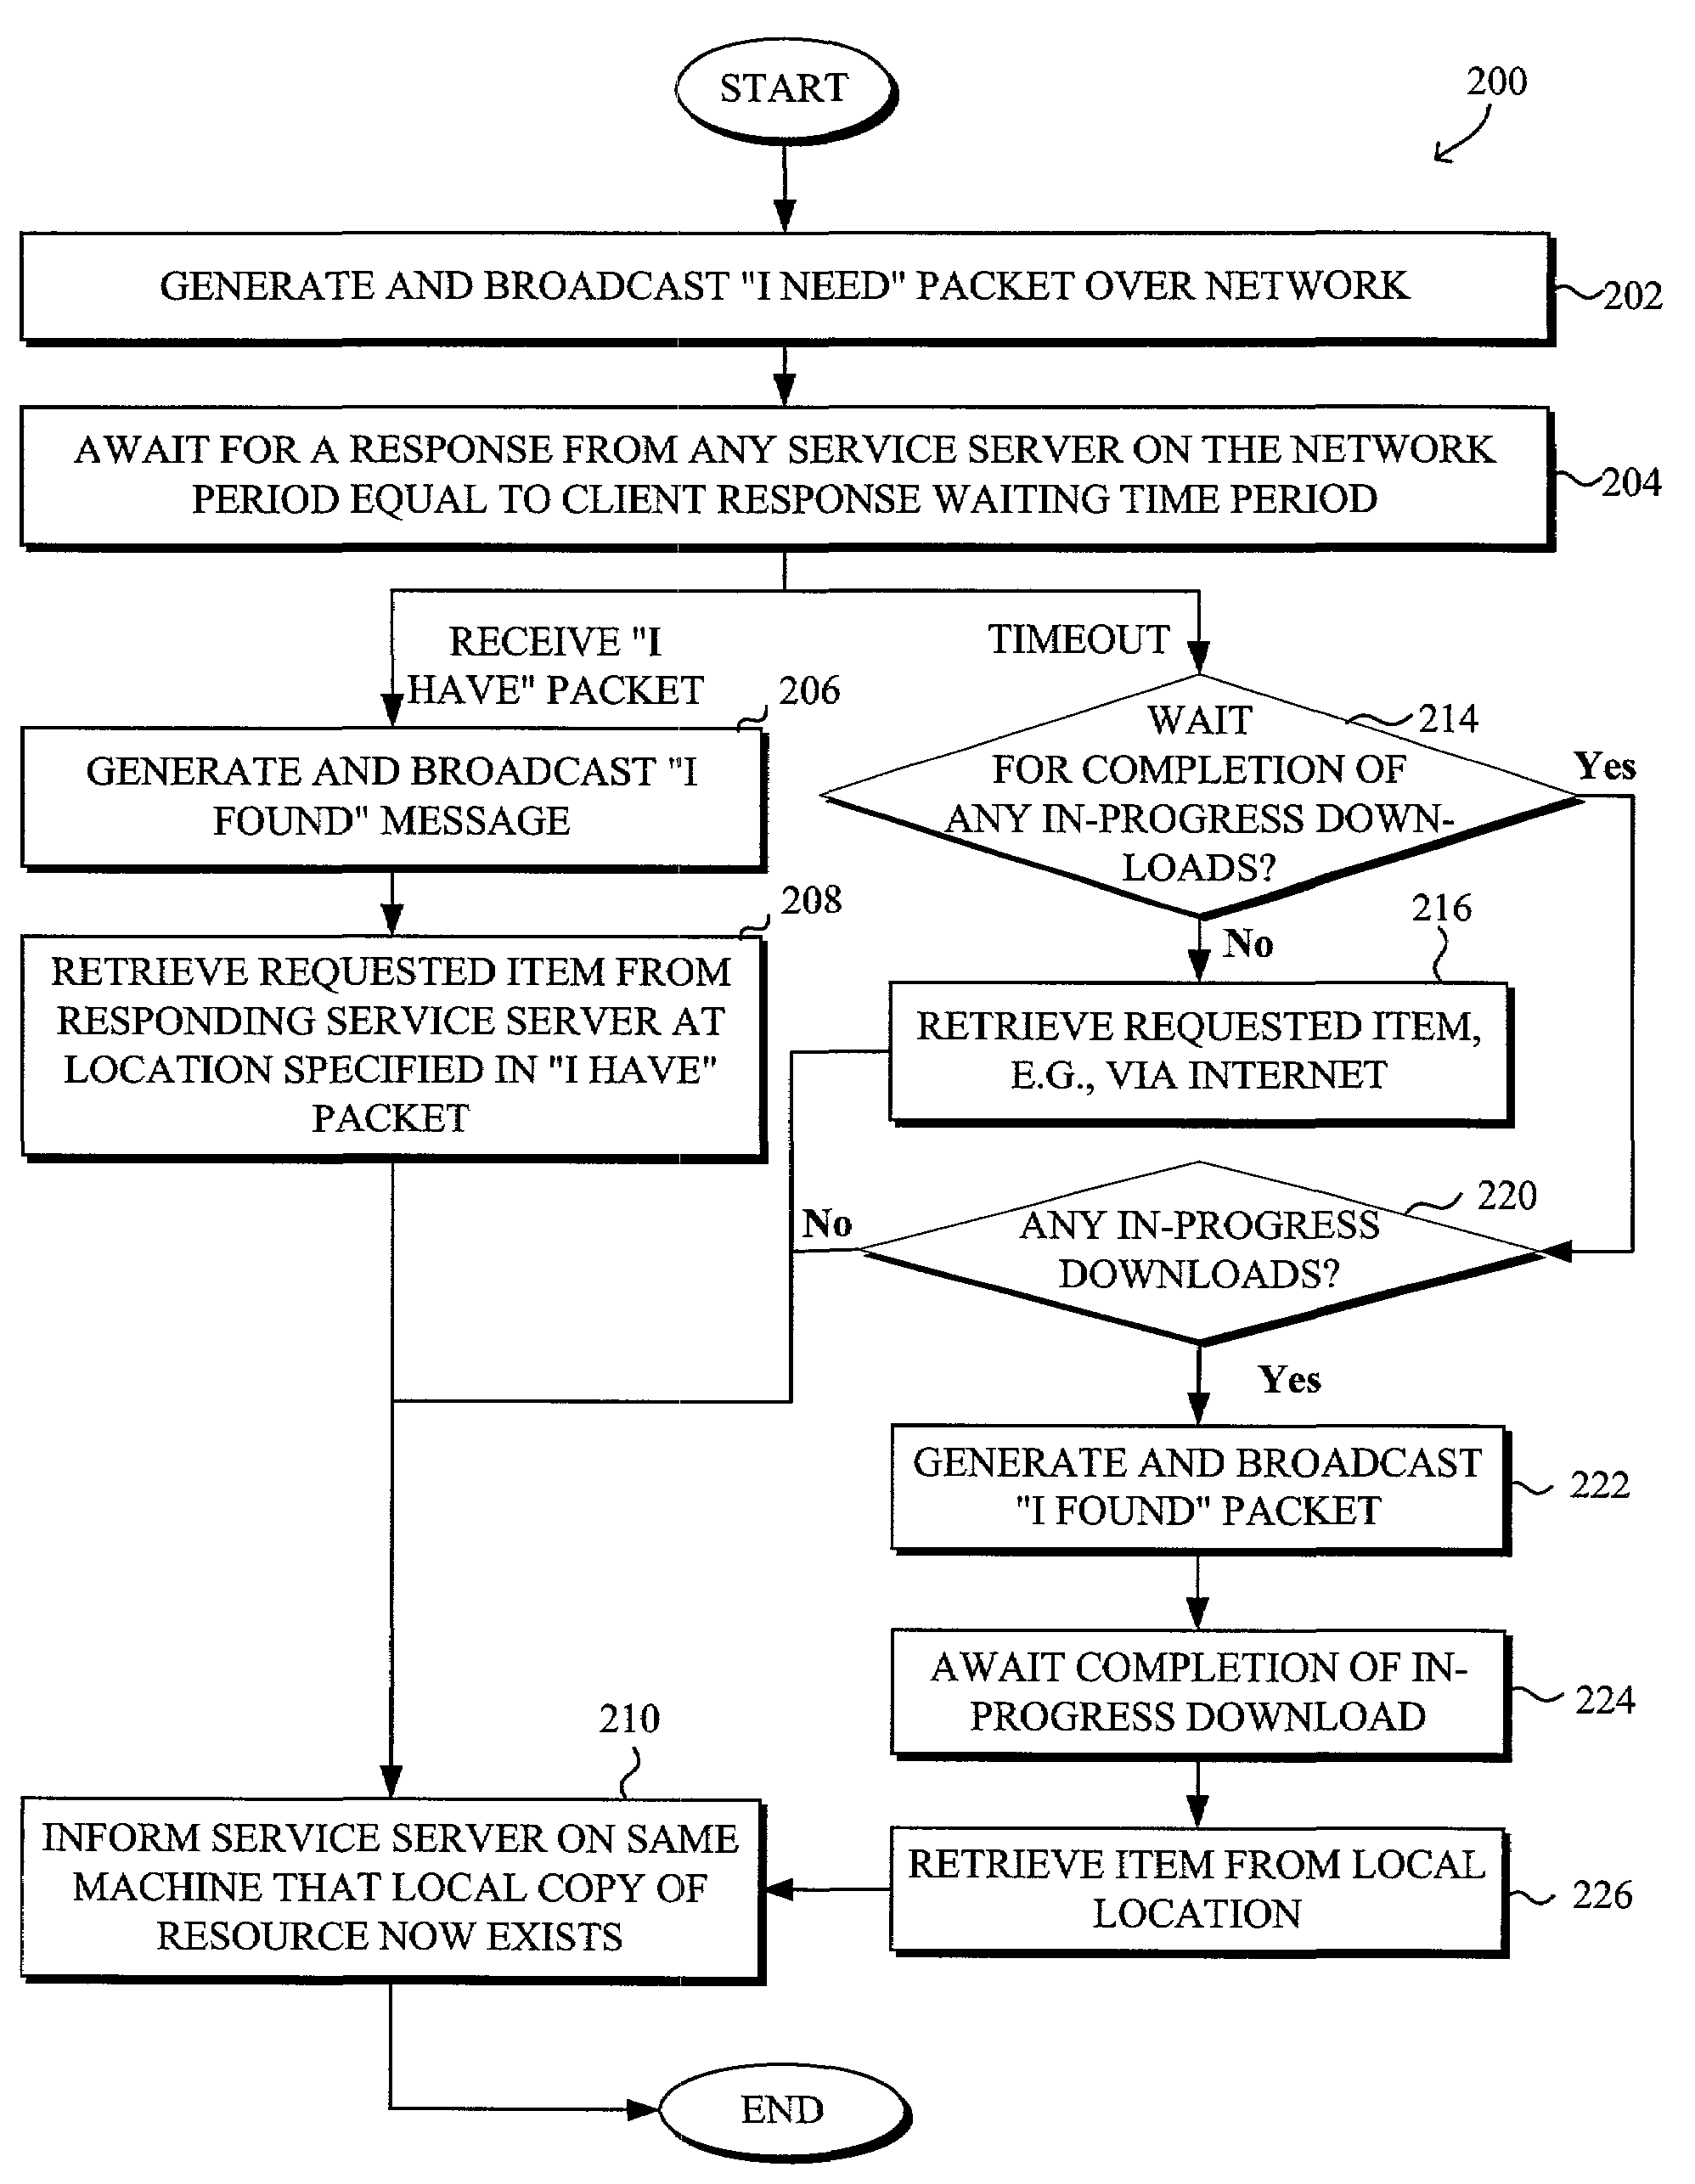 System and method to securely confirm performance of task by a peer in a peer-to-peer network environment